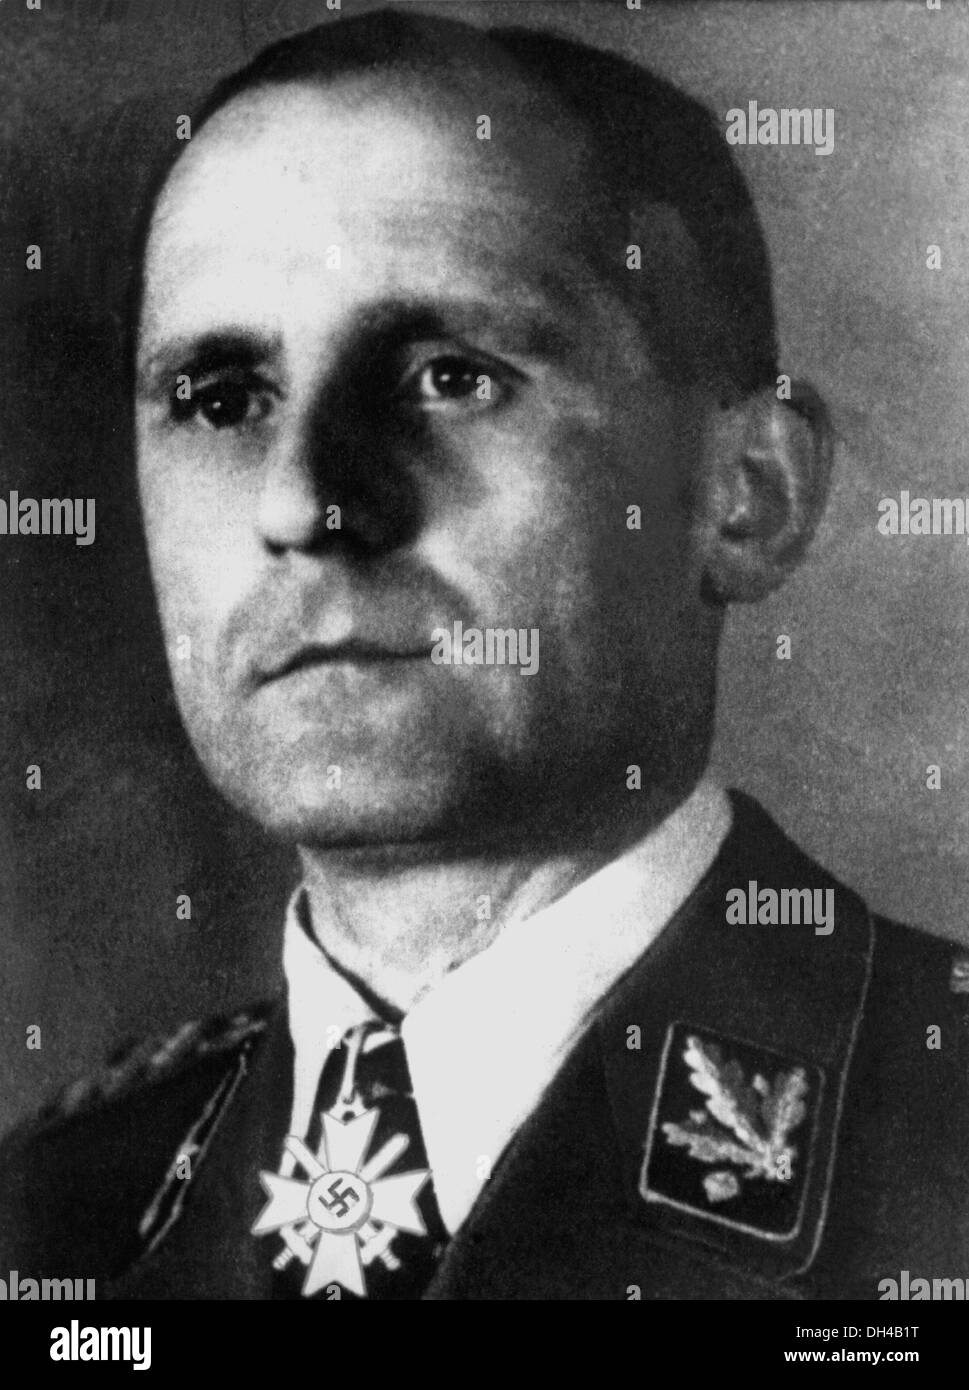 Contemporary picture of SS Obergruppenführer Heinrich Müller. He was also the chief of Gestapo, the secret state police during the Third Reich. Stock Photo